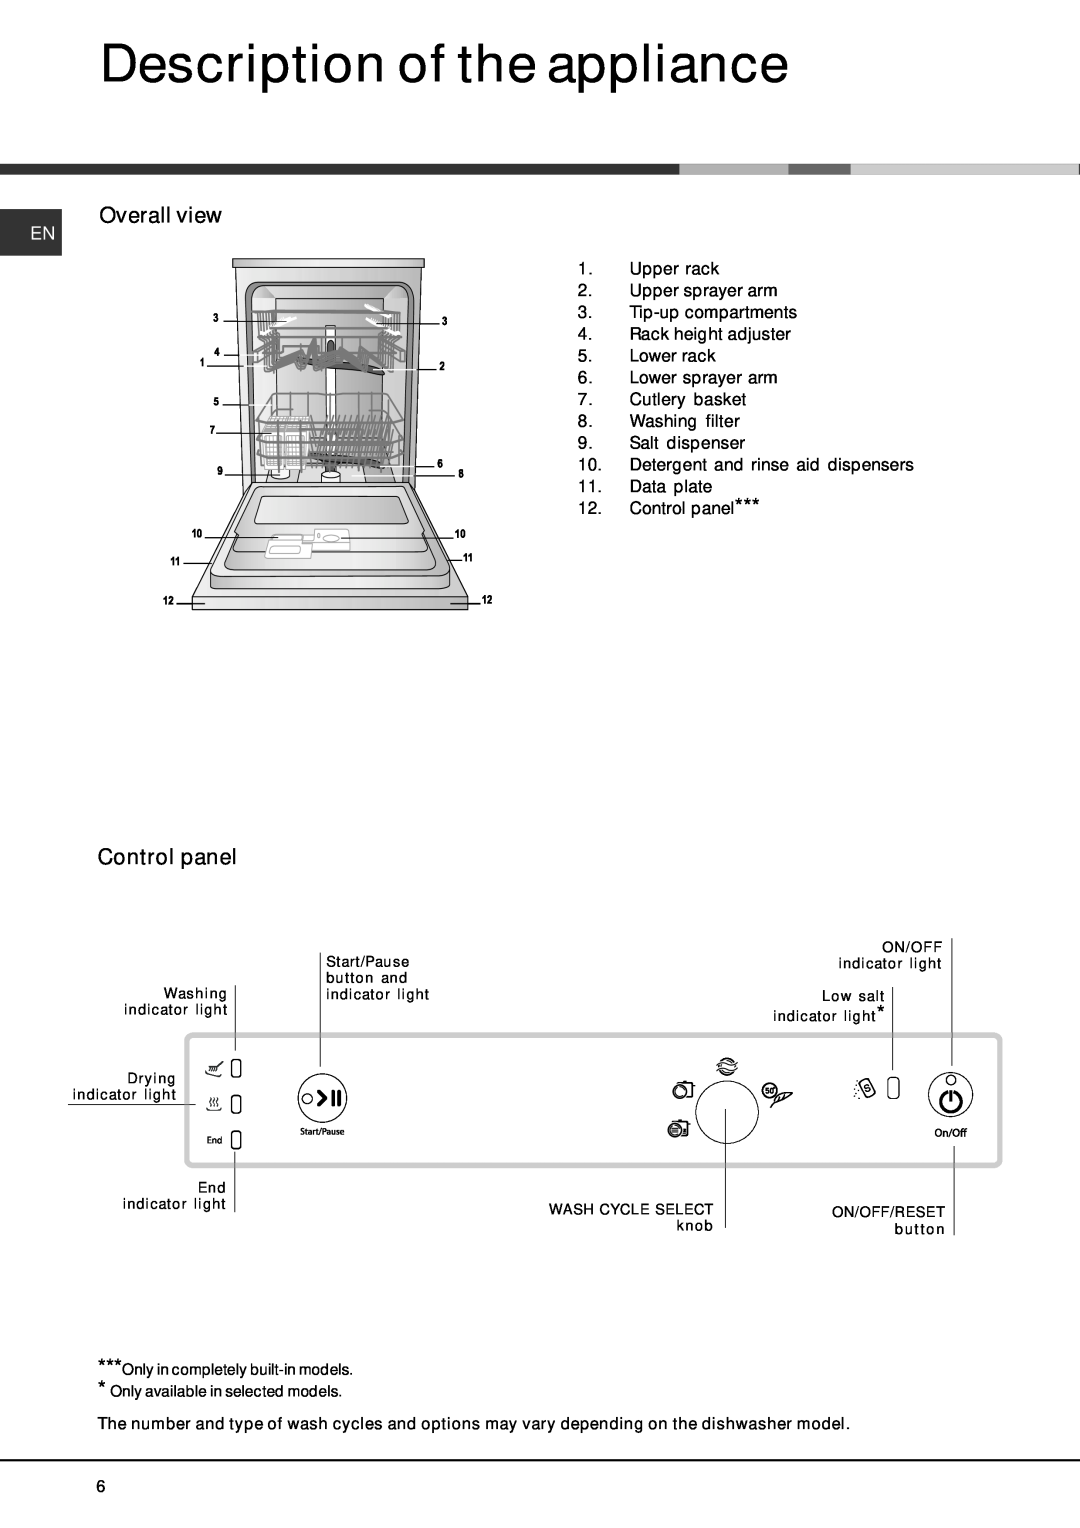 Hotpoint LFS 114, Hotpoint Dishwasher manual Description of the appliance, Overall view, Control panel 